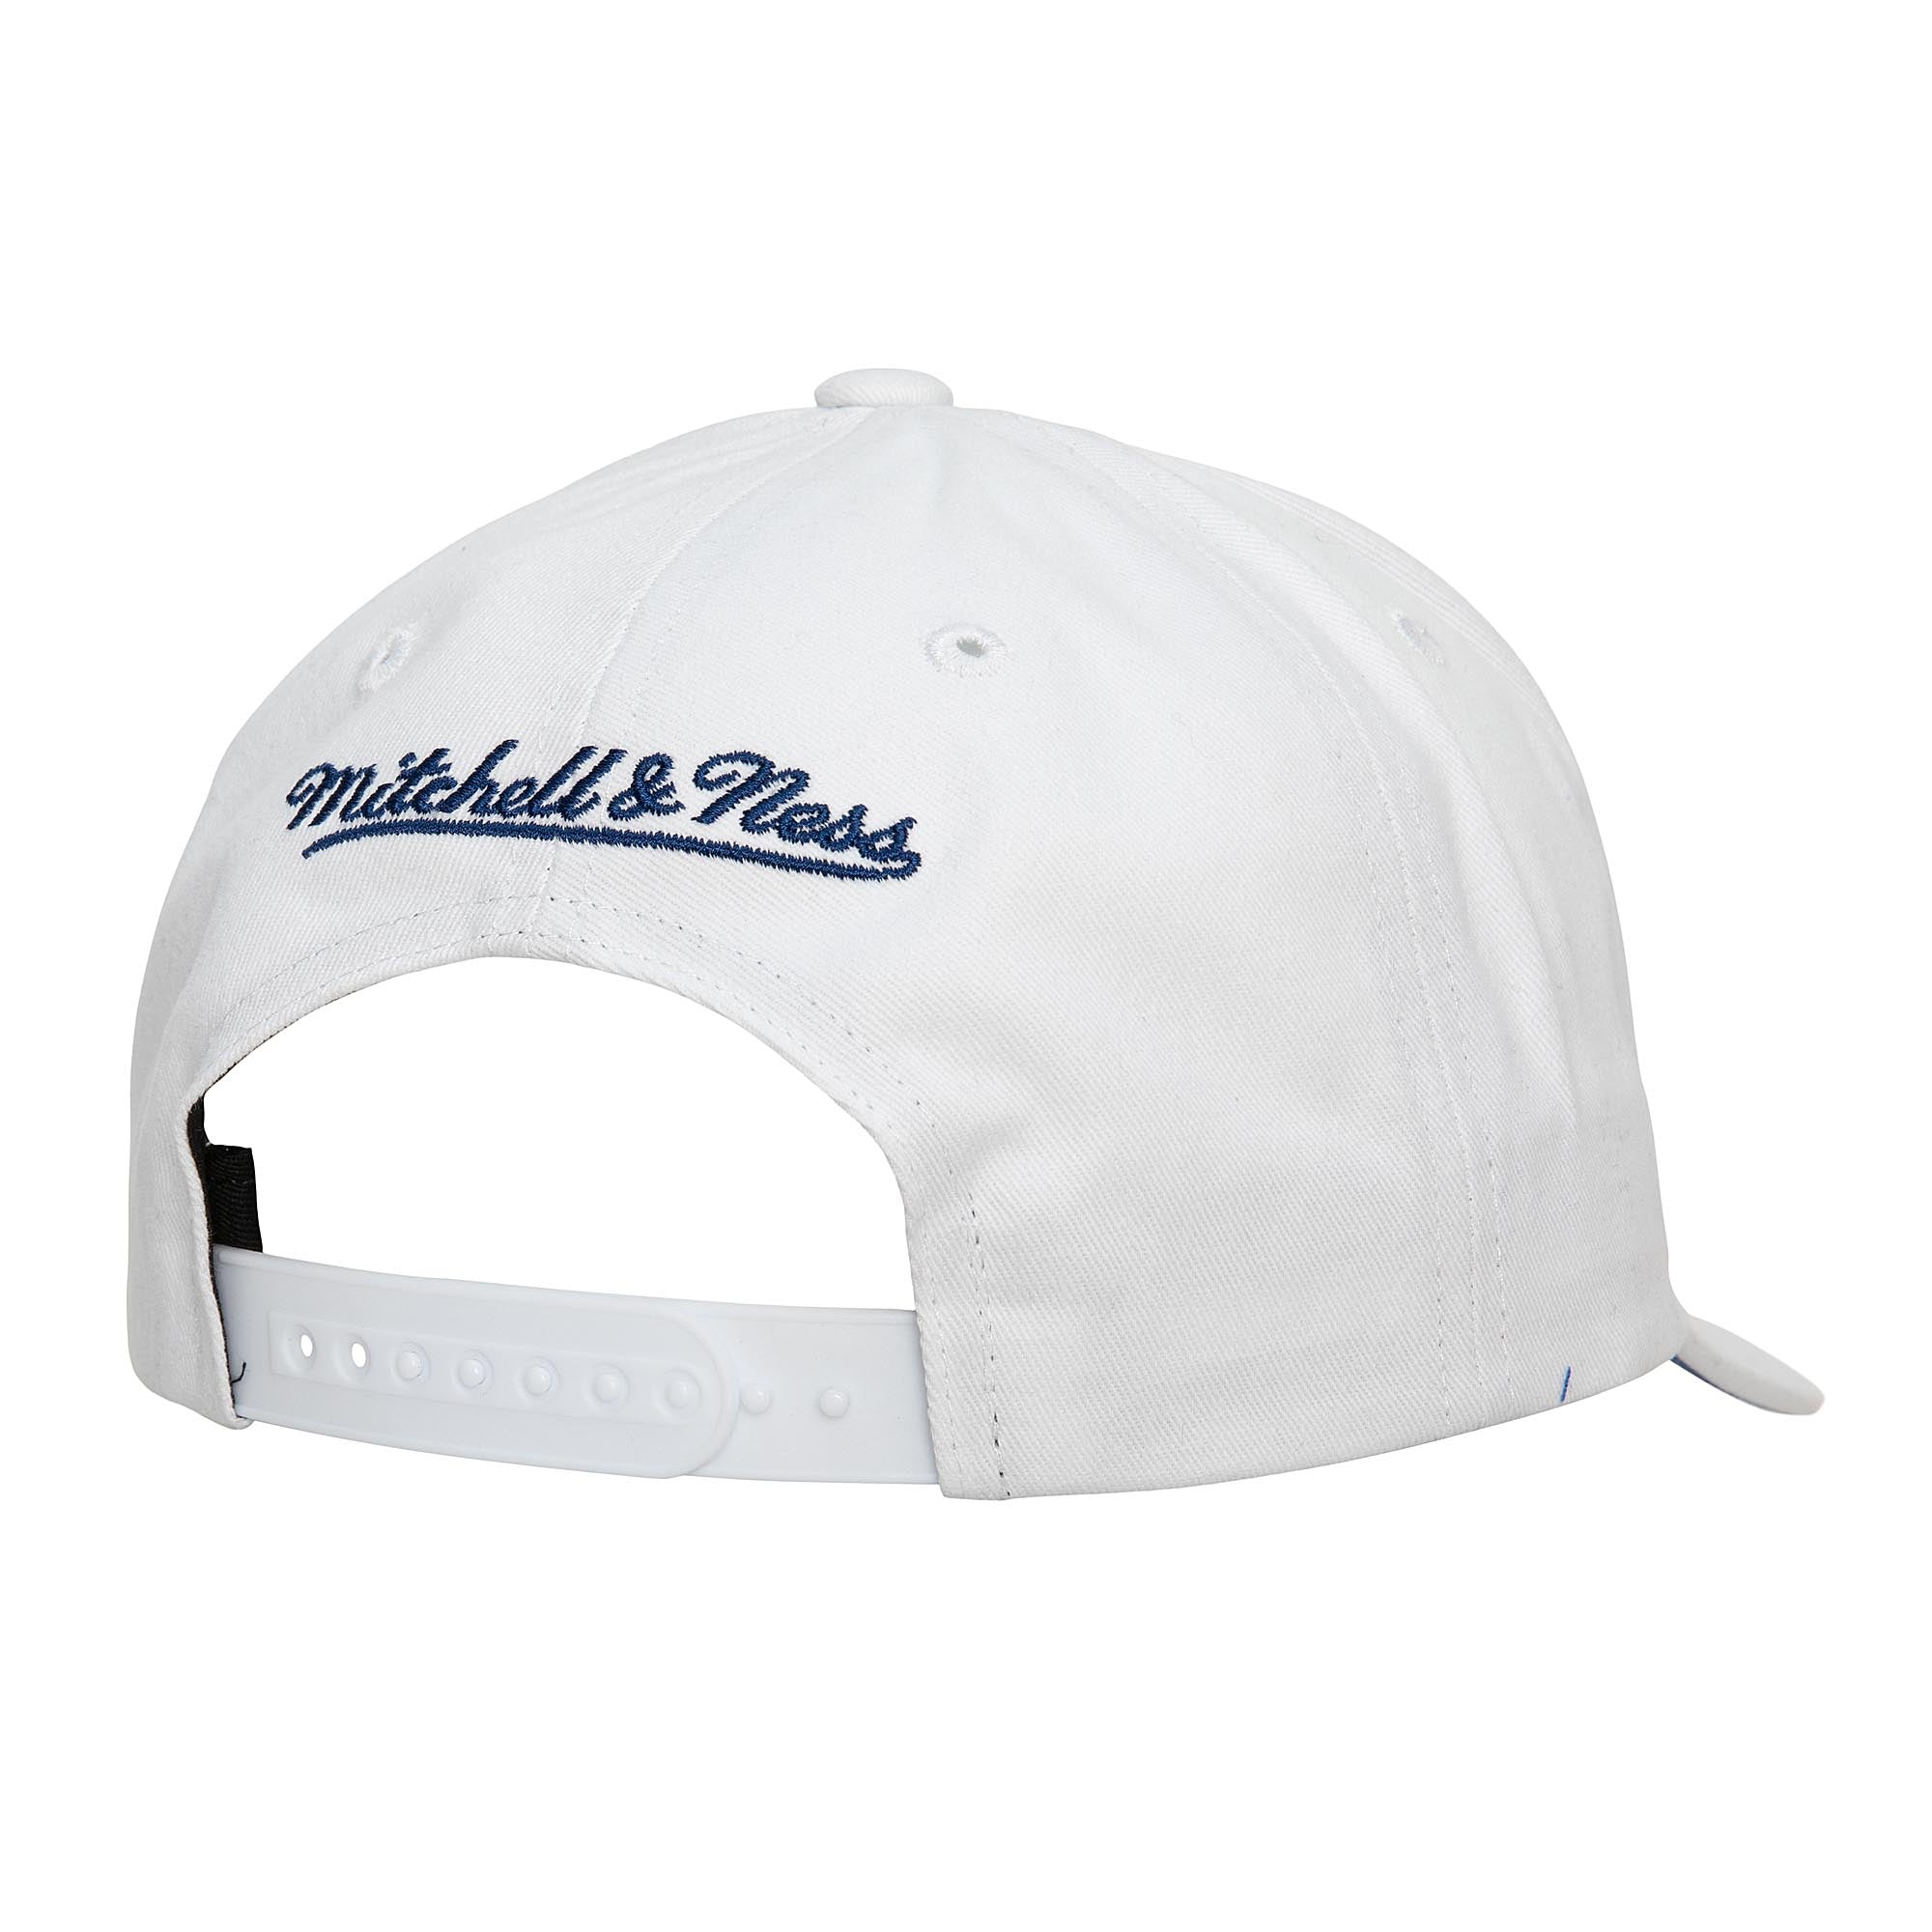 All In Pro Snapback - Toronto Maple Leafs White